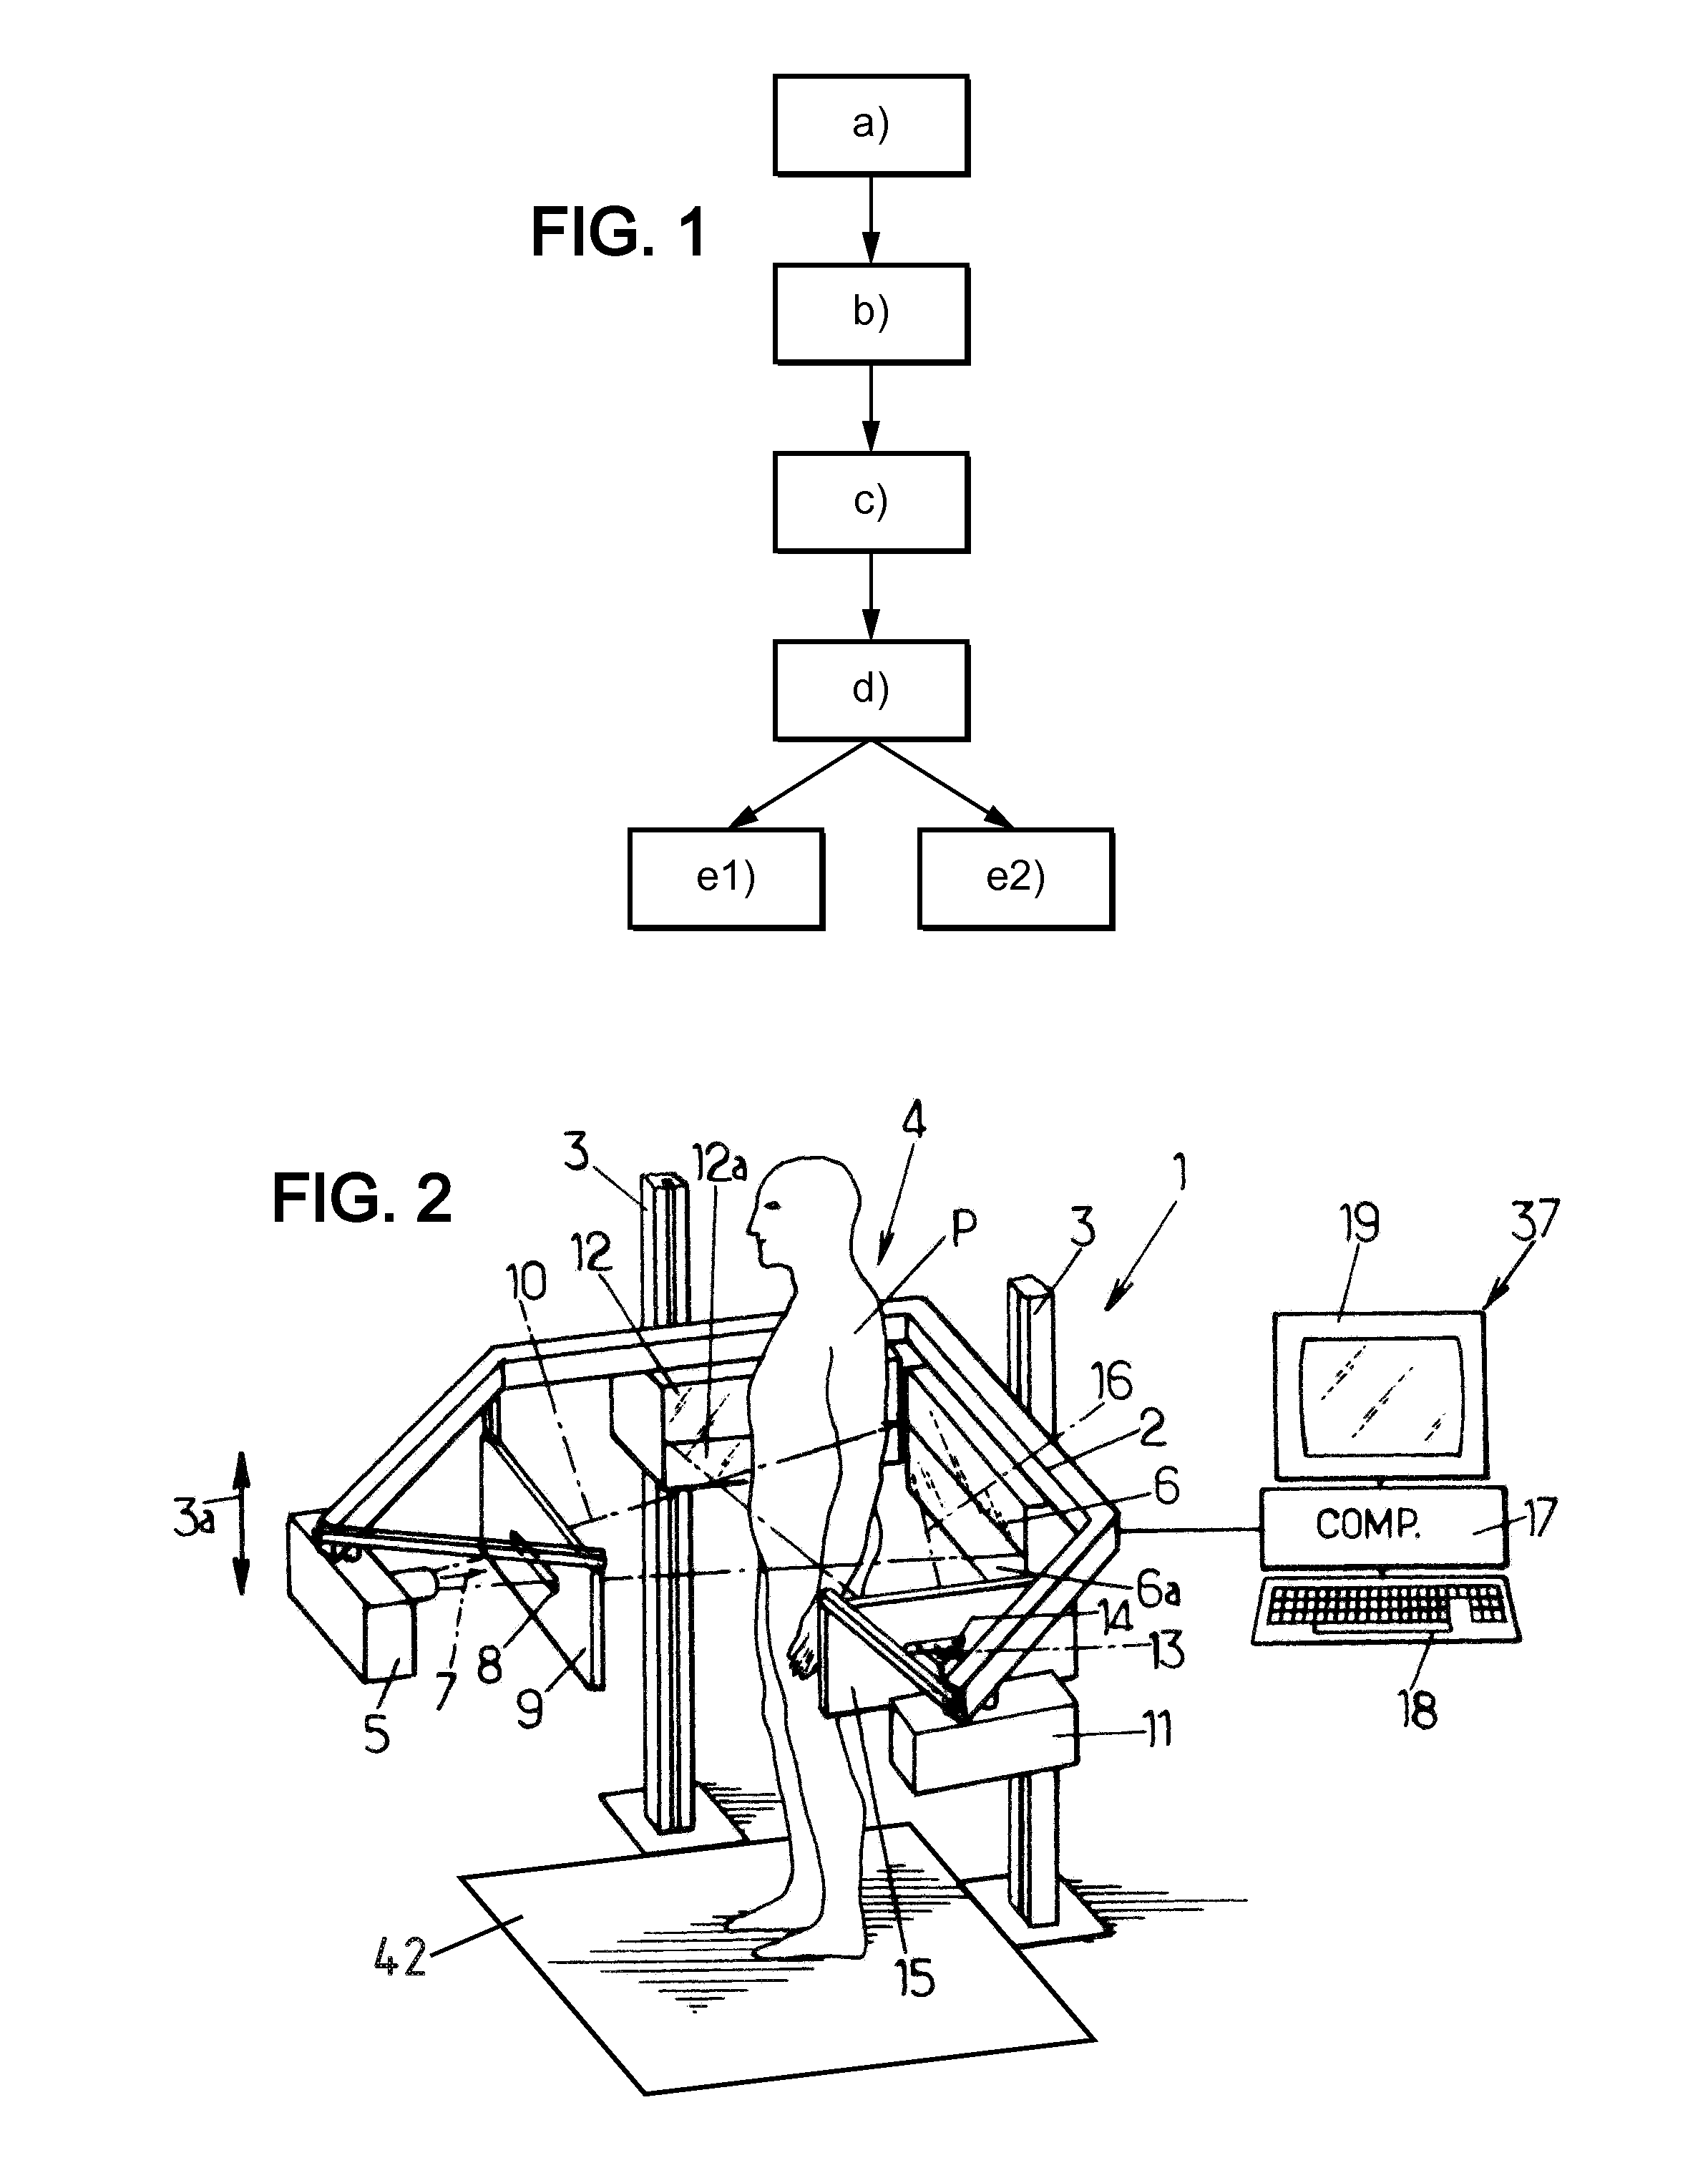 Method for designing a patient specific orthopaedic device